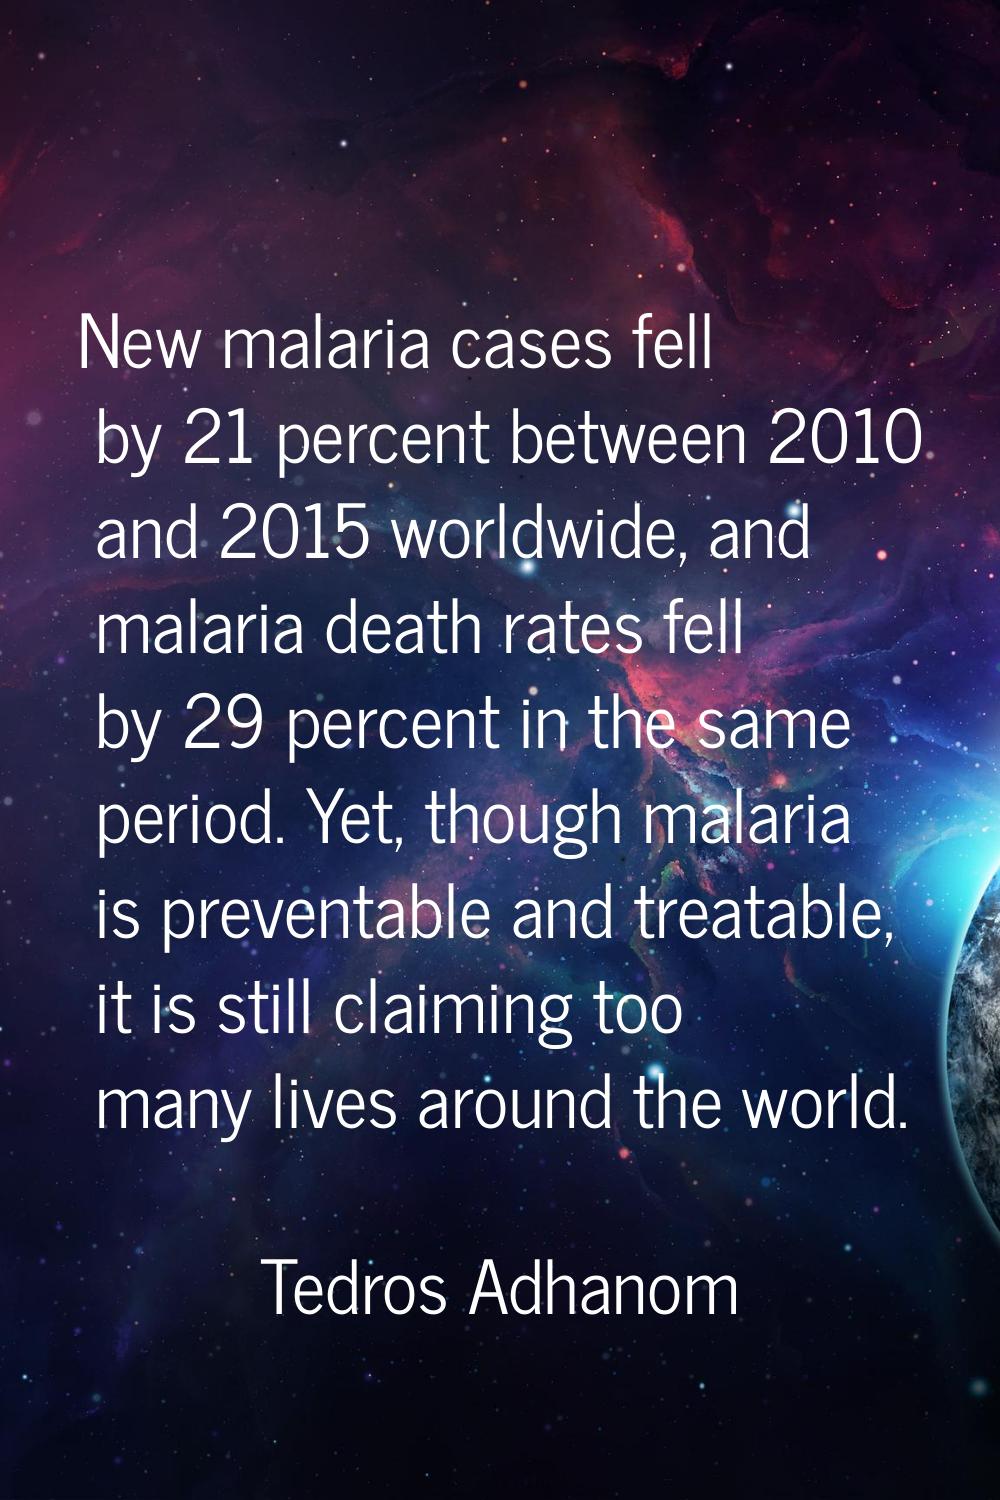 New malaria cases fell by 21 percent between 2010 and 2015 worldwide, and malaria death rates fell 